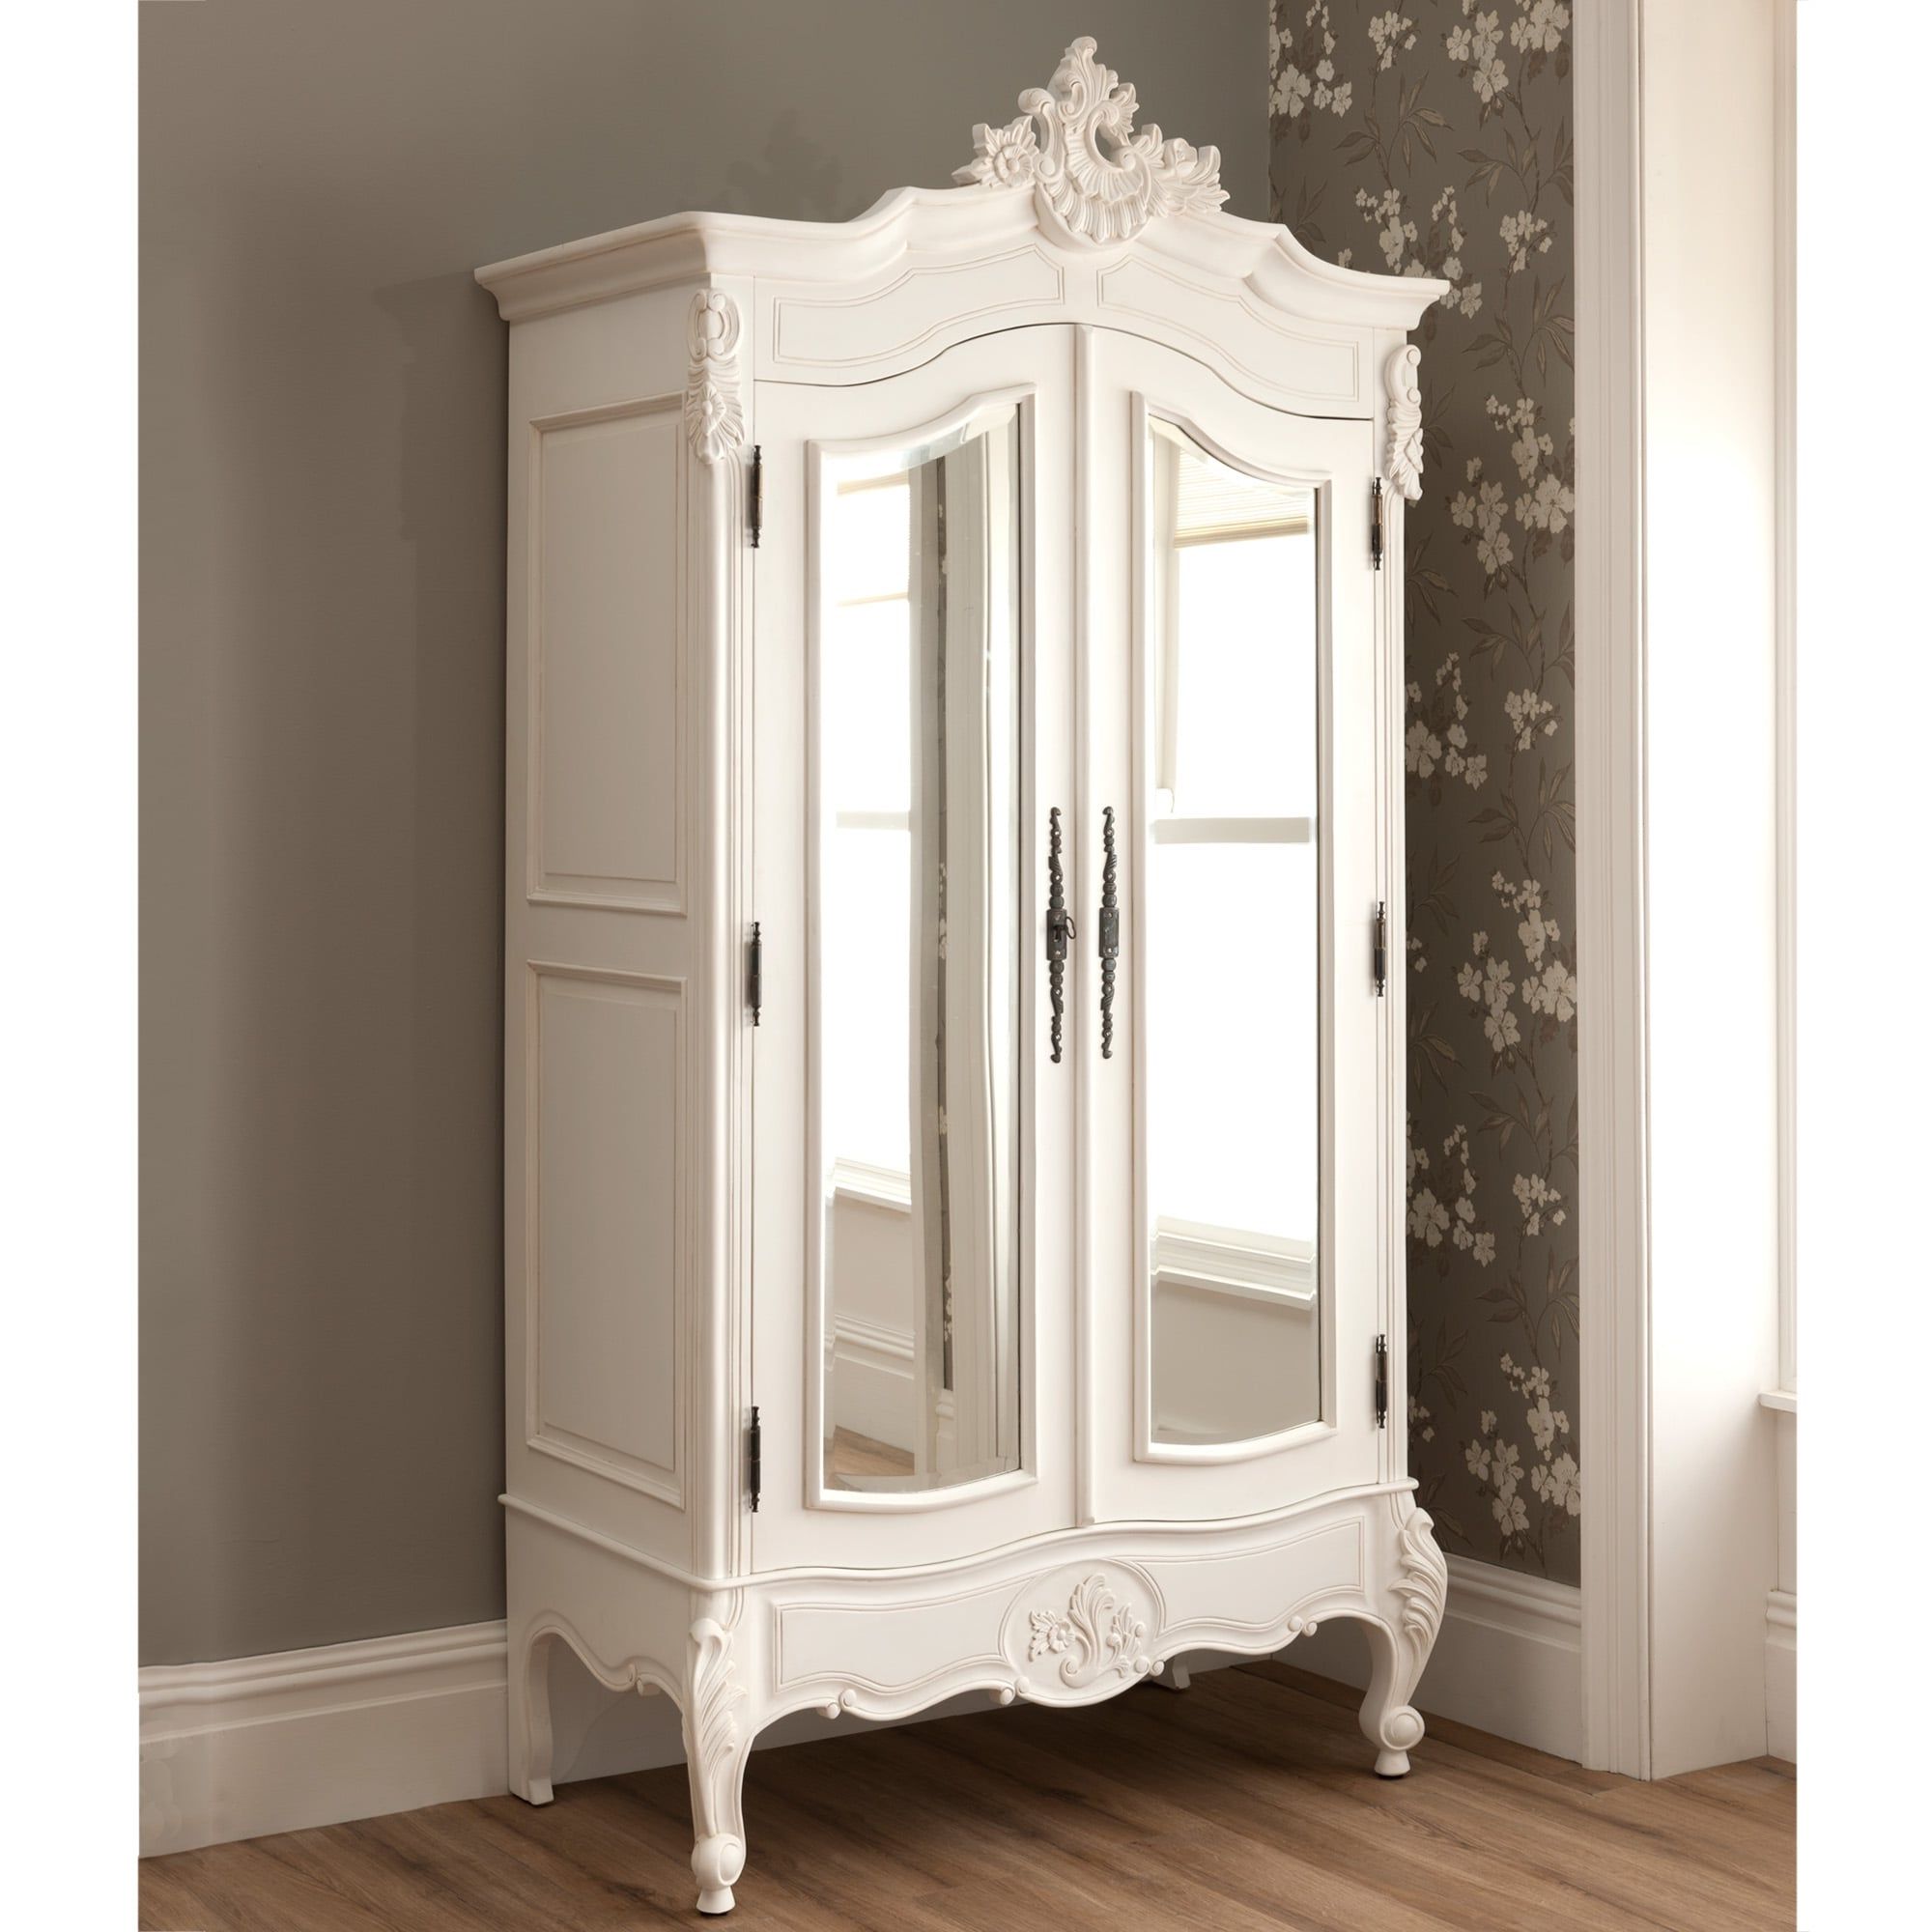 La Rochelle Antique French Mirrored 2 Door Wardrobe Intended For French White Wardrobes (View 2 of 20)